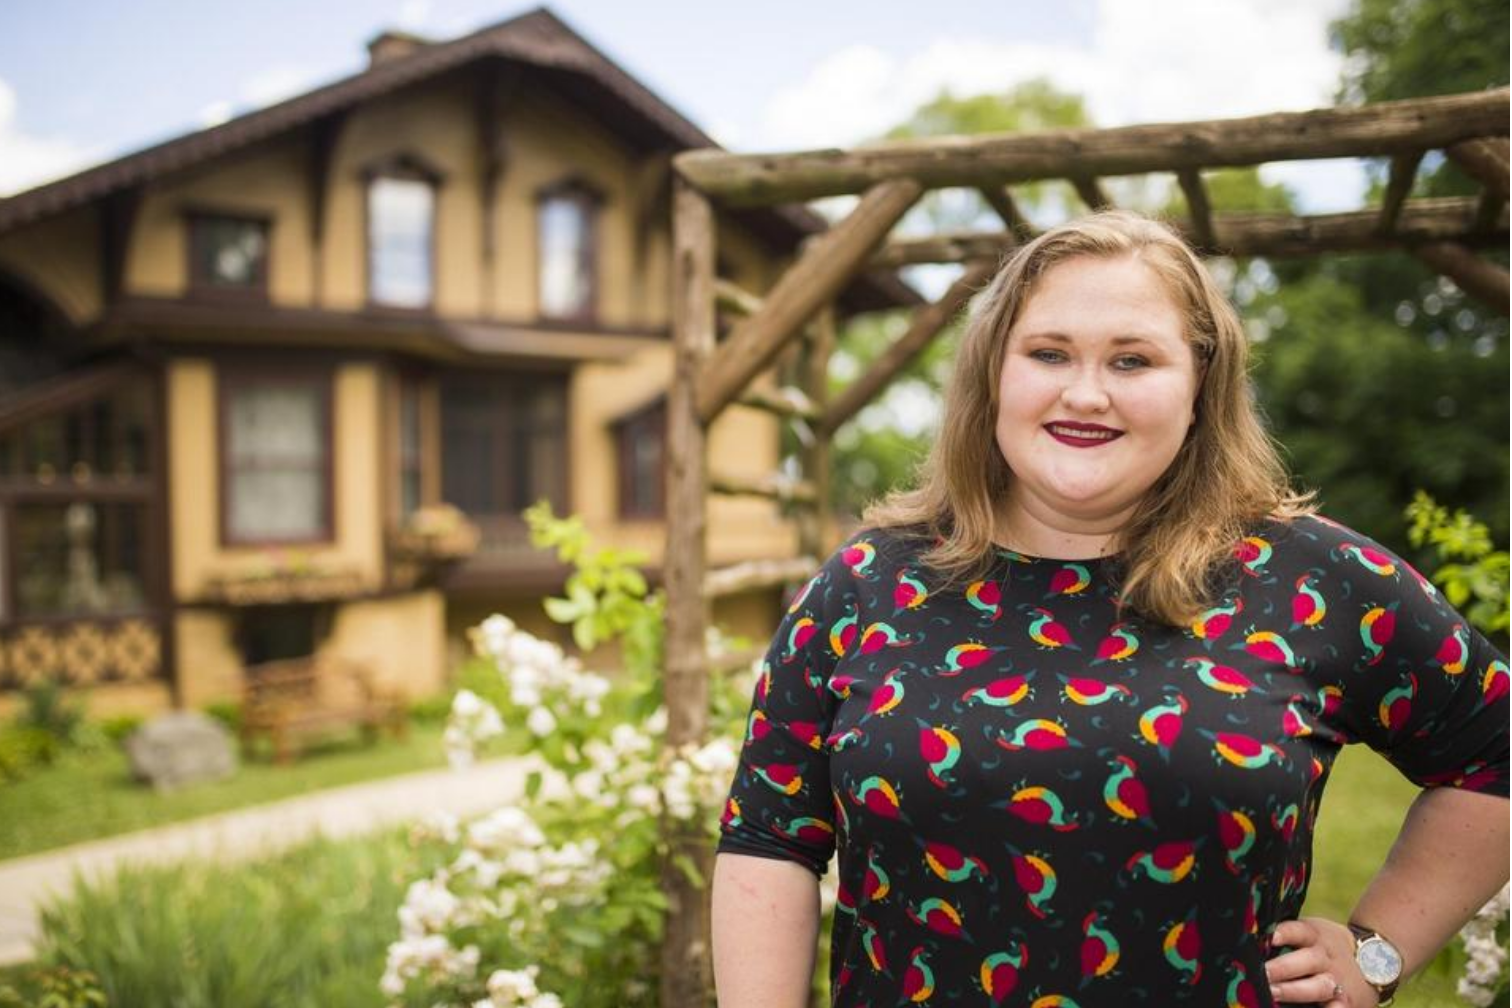 Samantha Hochmann is the executive director of Tinker Swiss Cottage Musuem & Gardens, seen here at the musuem on Tuesday, June 23 in Rockford. Image by Scott P. Yates / Rockford Register Star. United States, 2020.